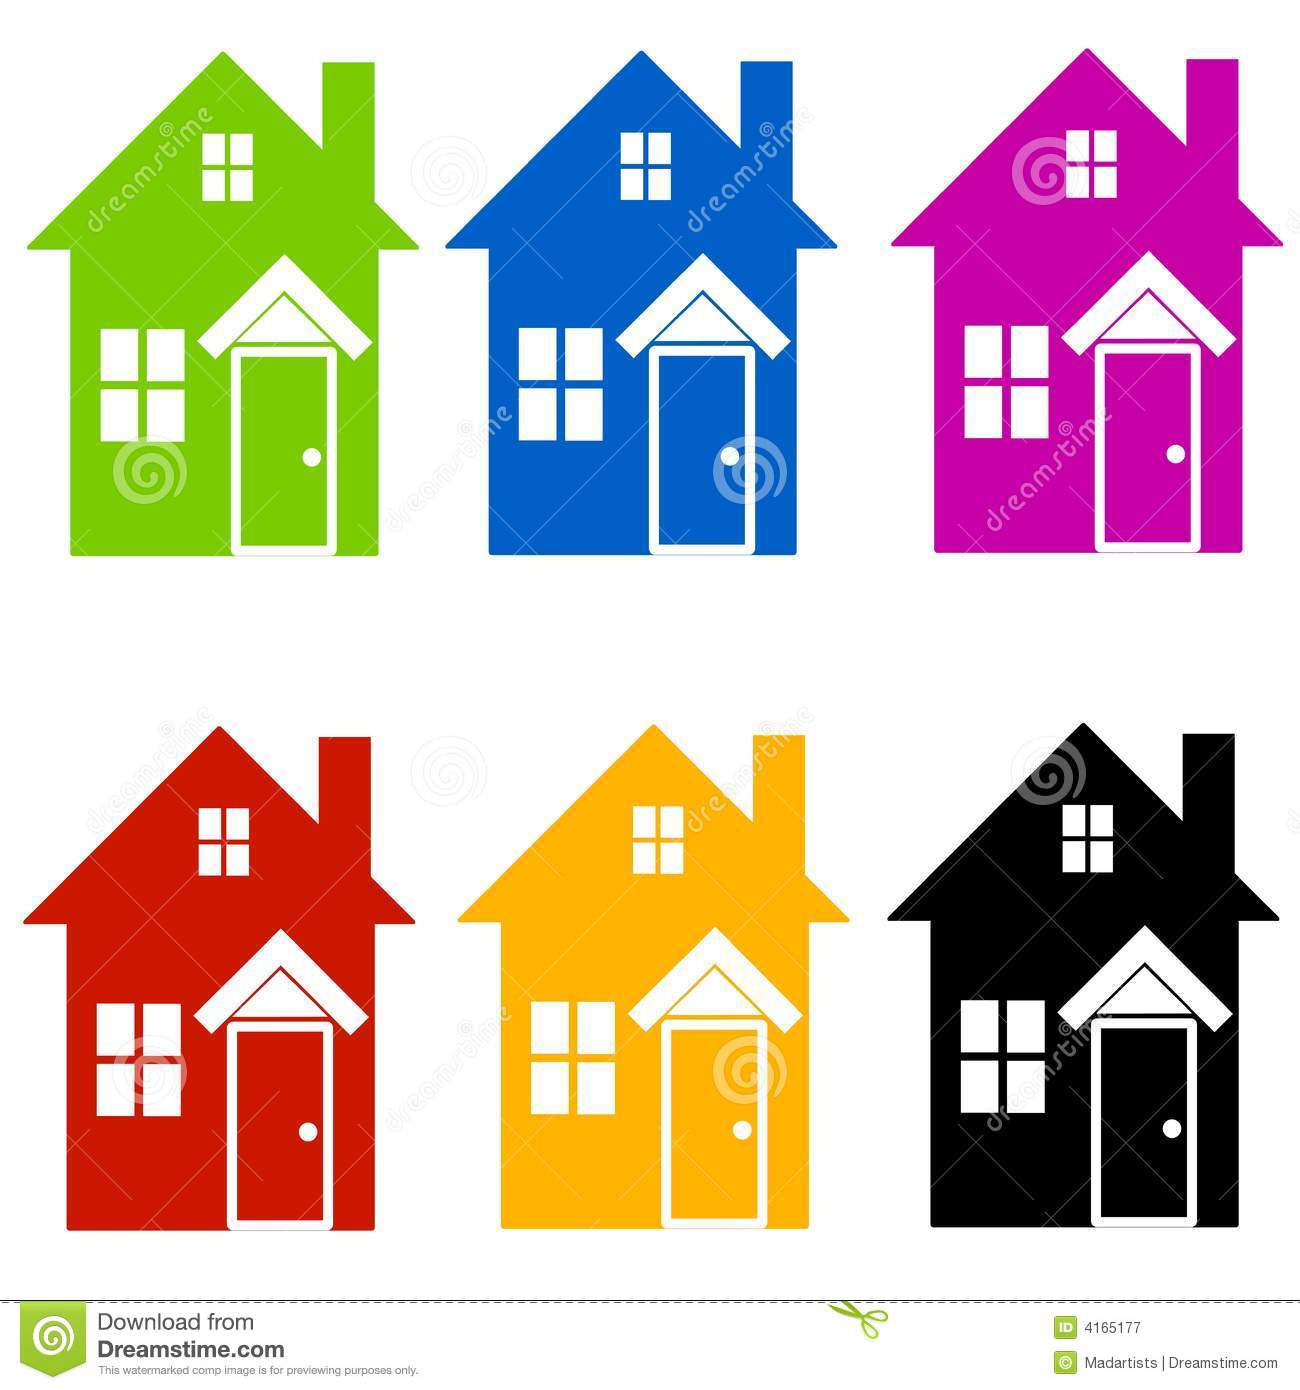 Free House Clipart Free Download Clip Art.